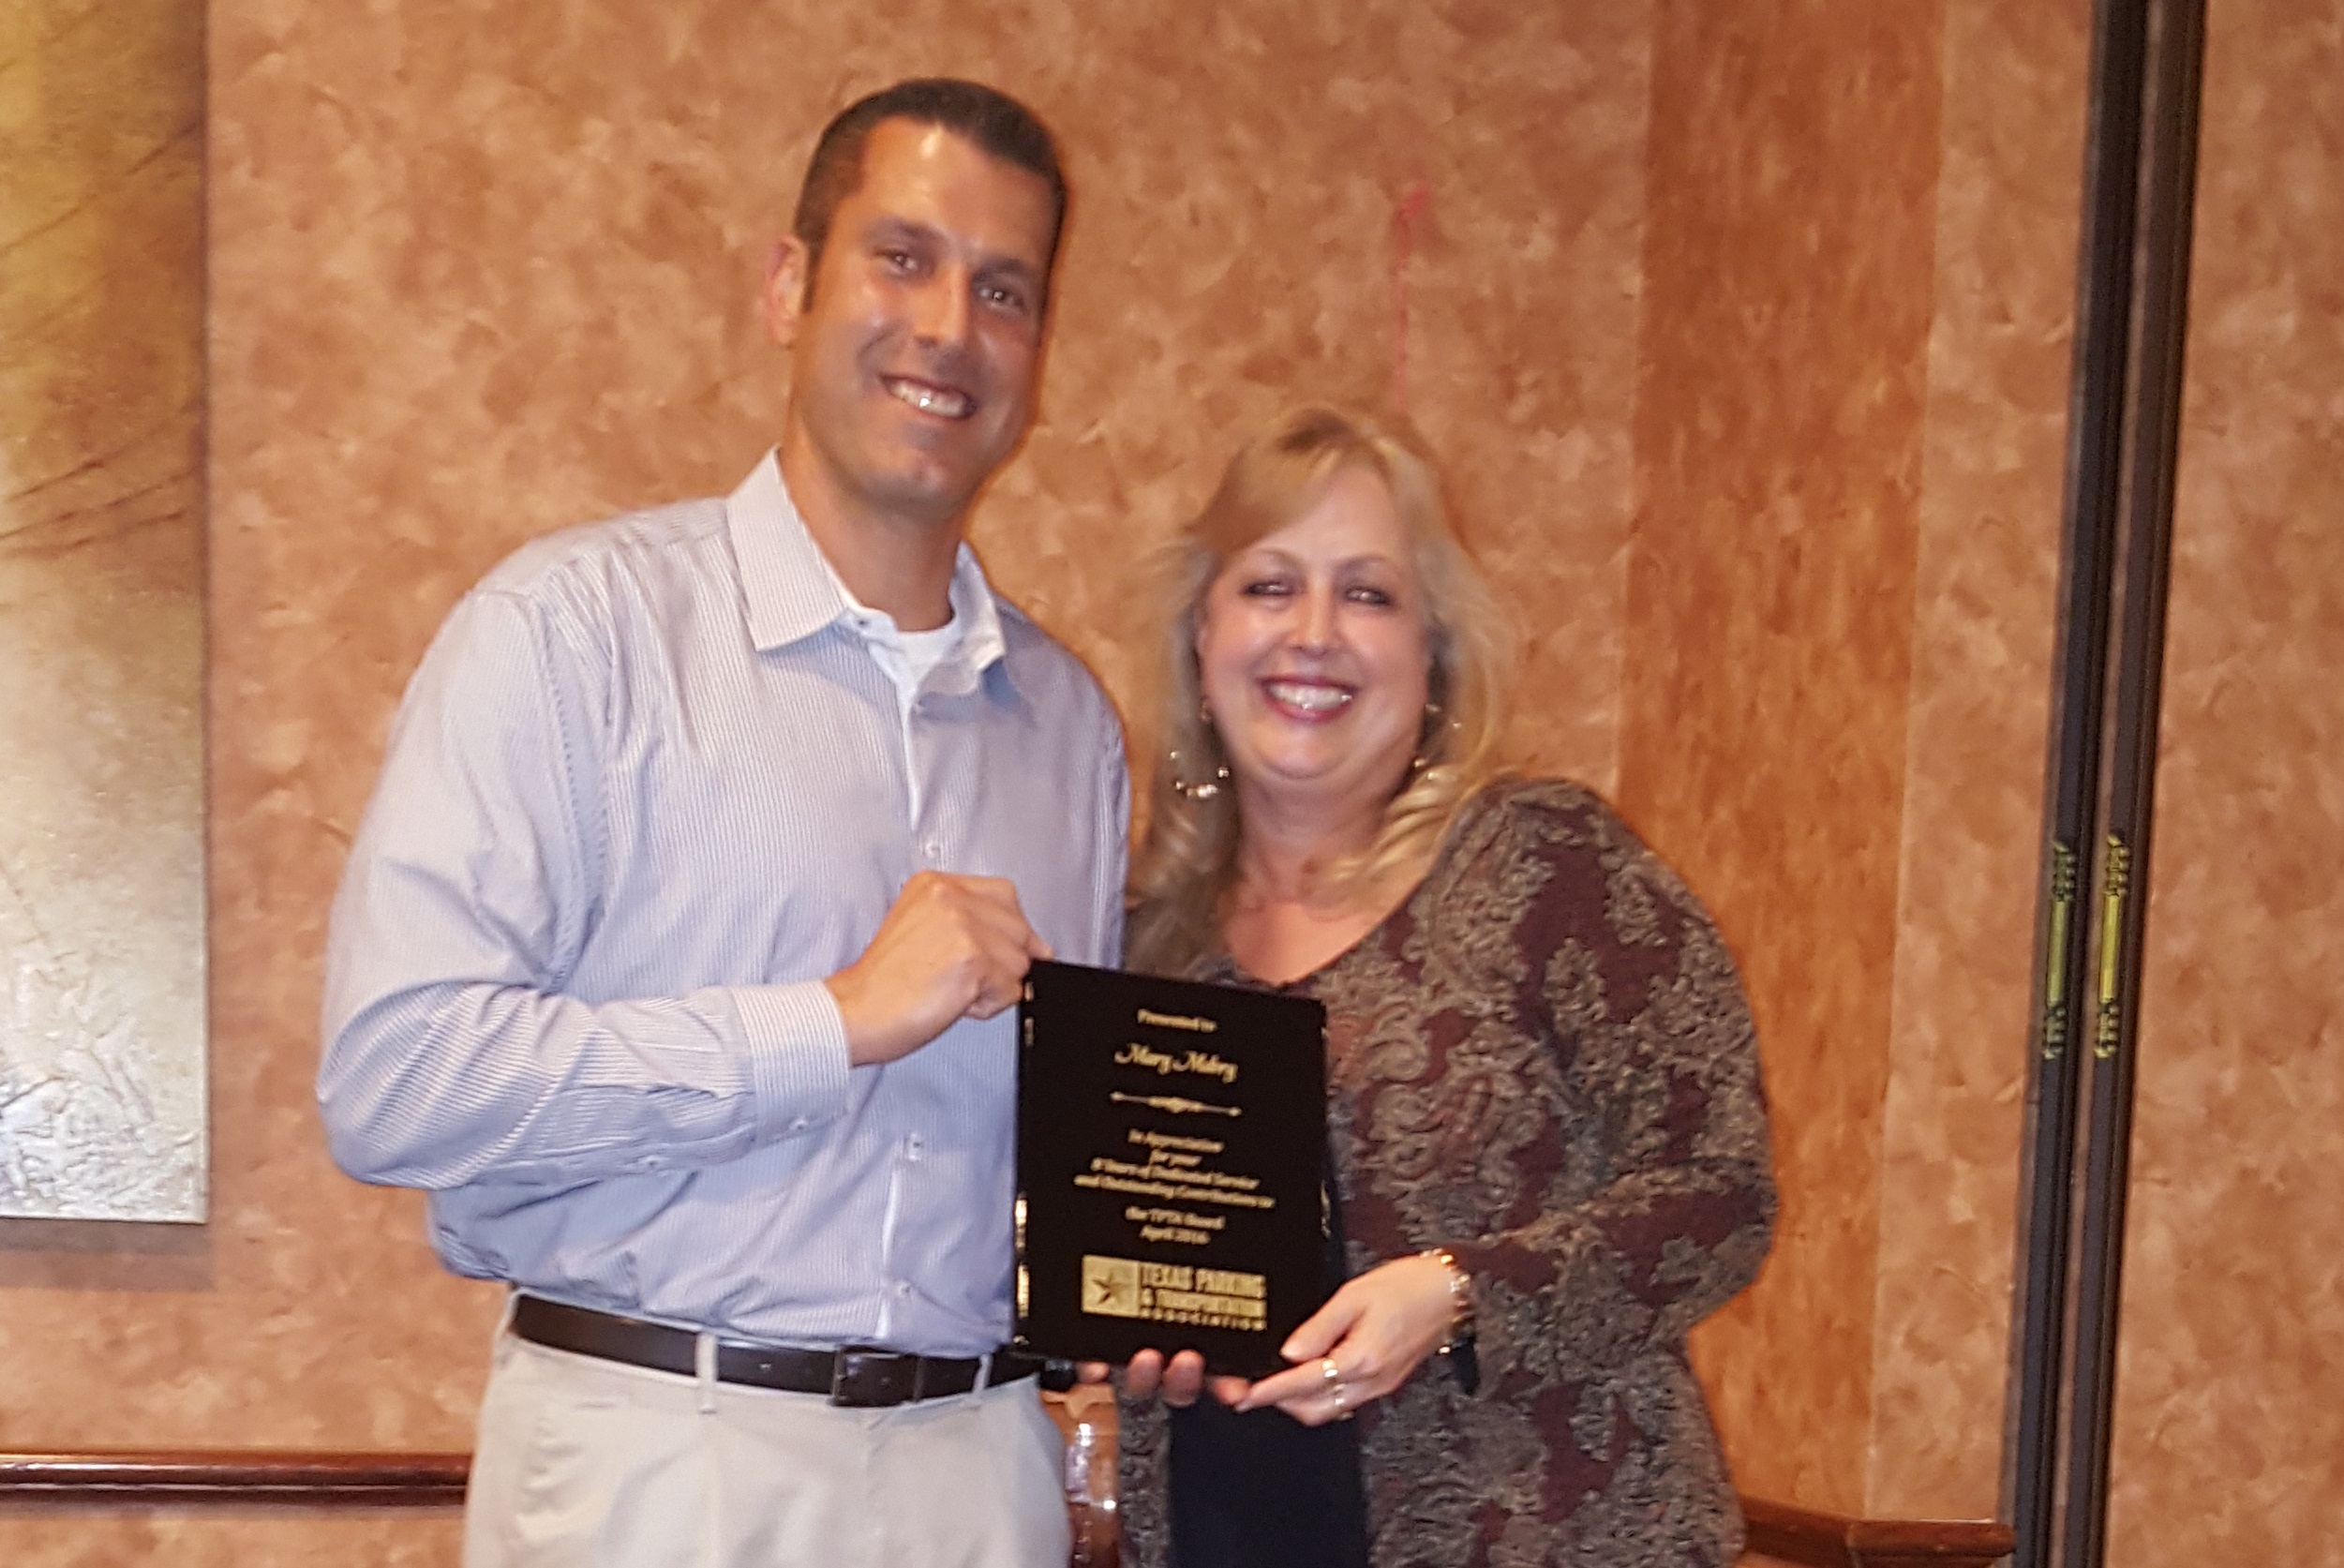 Mary Mabry is honored as outgoing board member for Texas Parking & Transportation Association